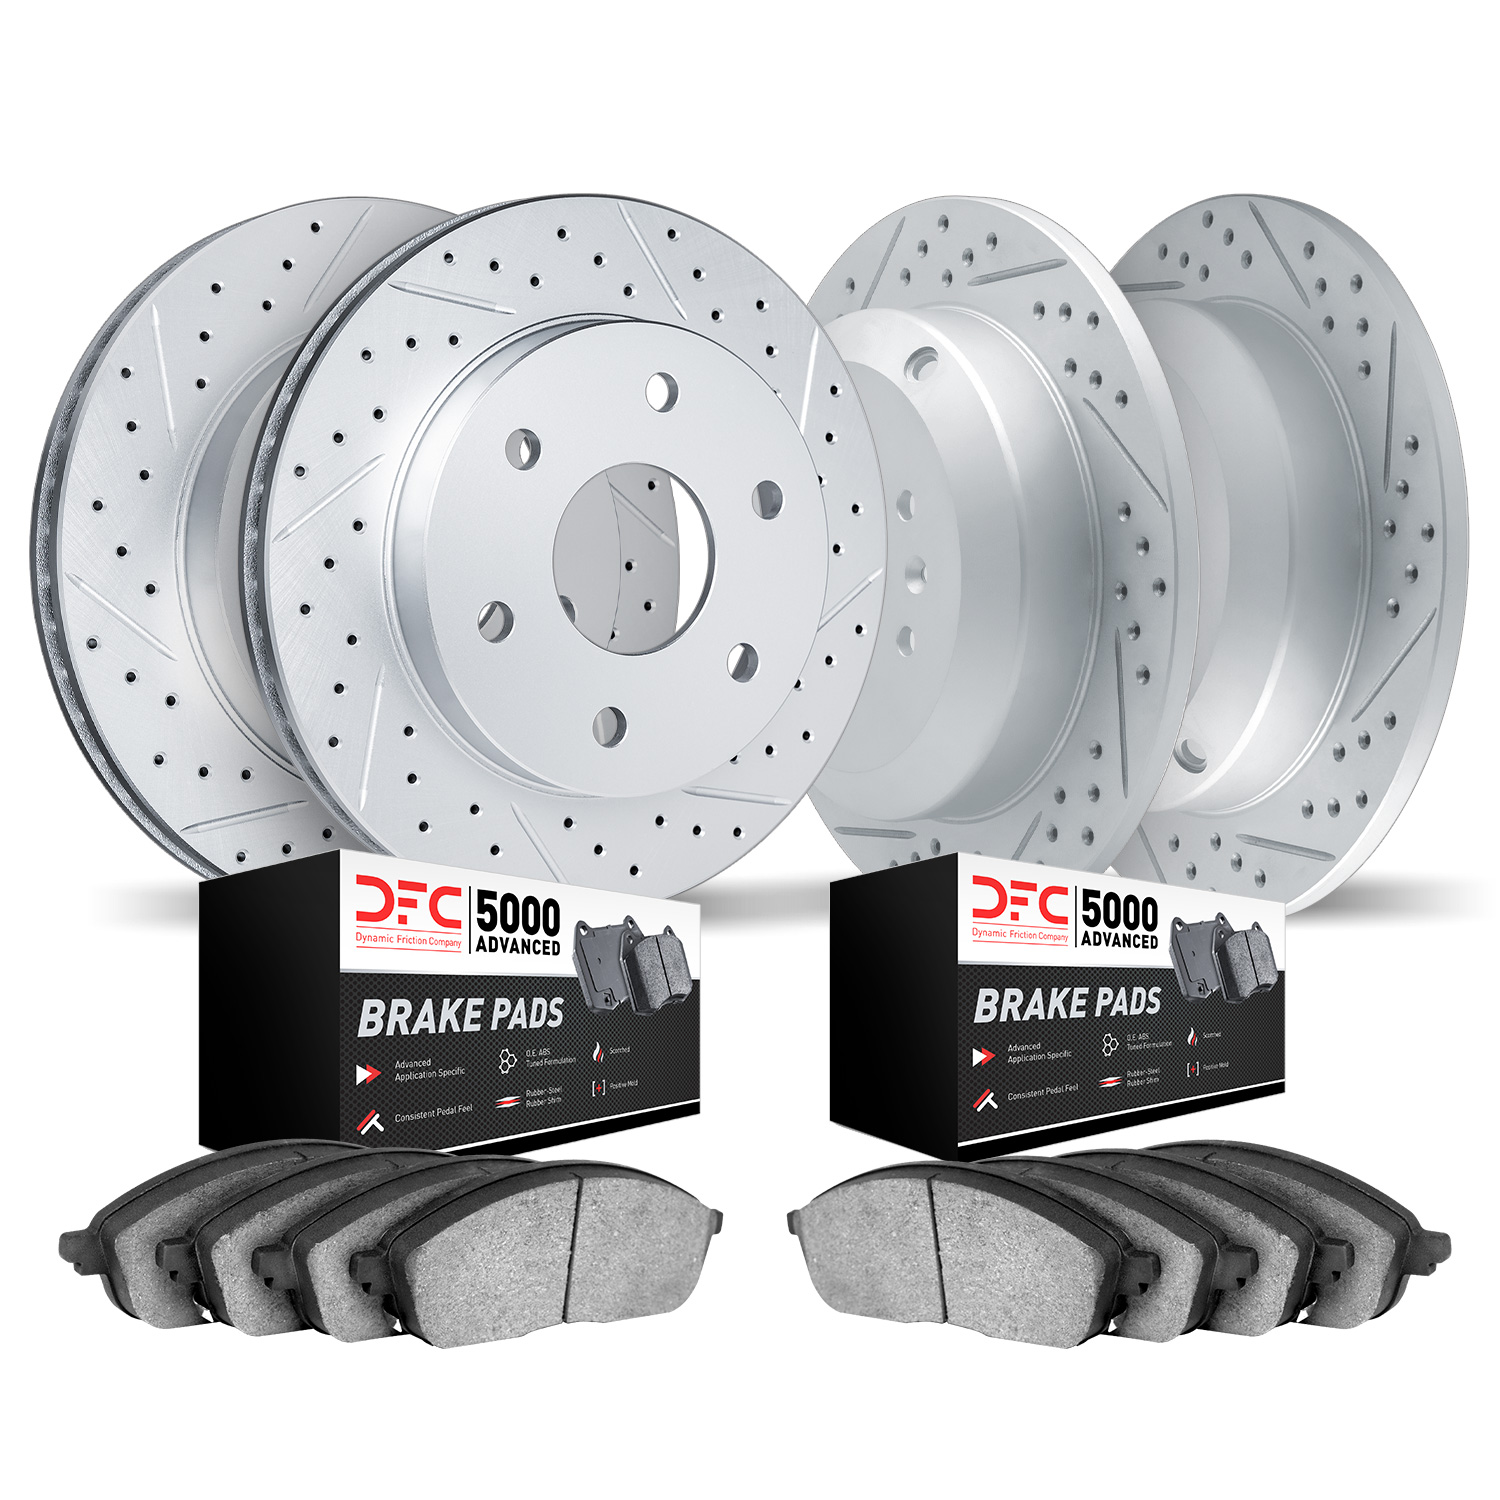 2504-67071 Geoperformance Drilled/Slotted Rotors w/5000 Advanced Brake Pads Kit, 2005-2007 Infiniti/Nissan, Position: Front and